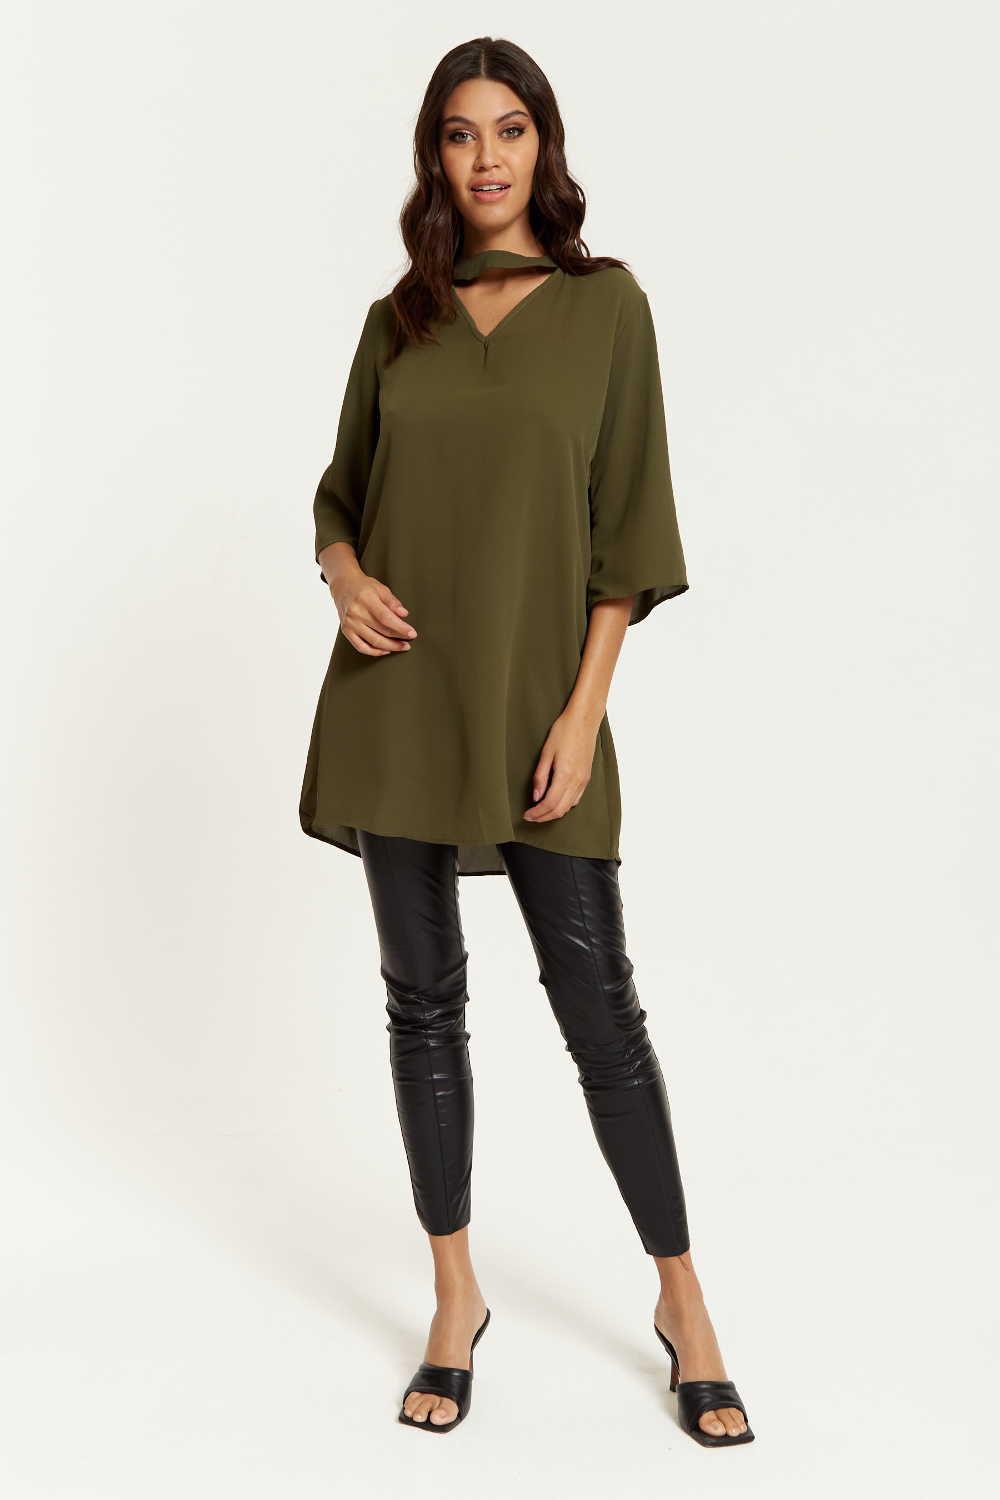 Oversized Detailed Neckline Tunic with 3/4 Sleeves in Khaki GLR FASHION NETWORKING